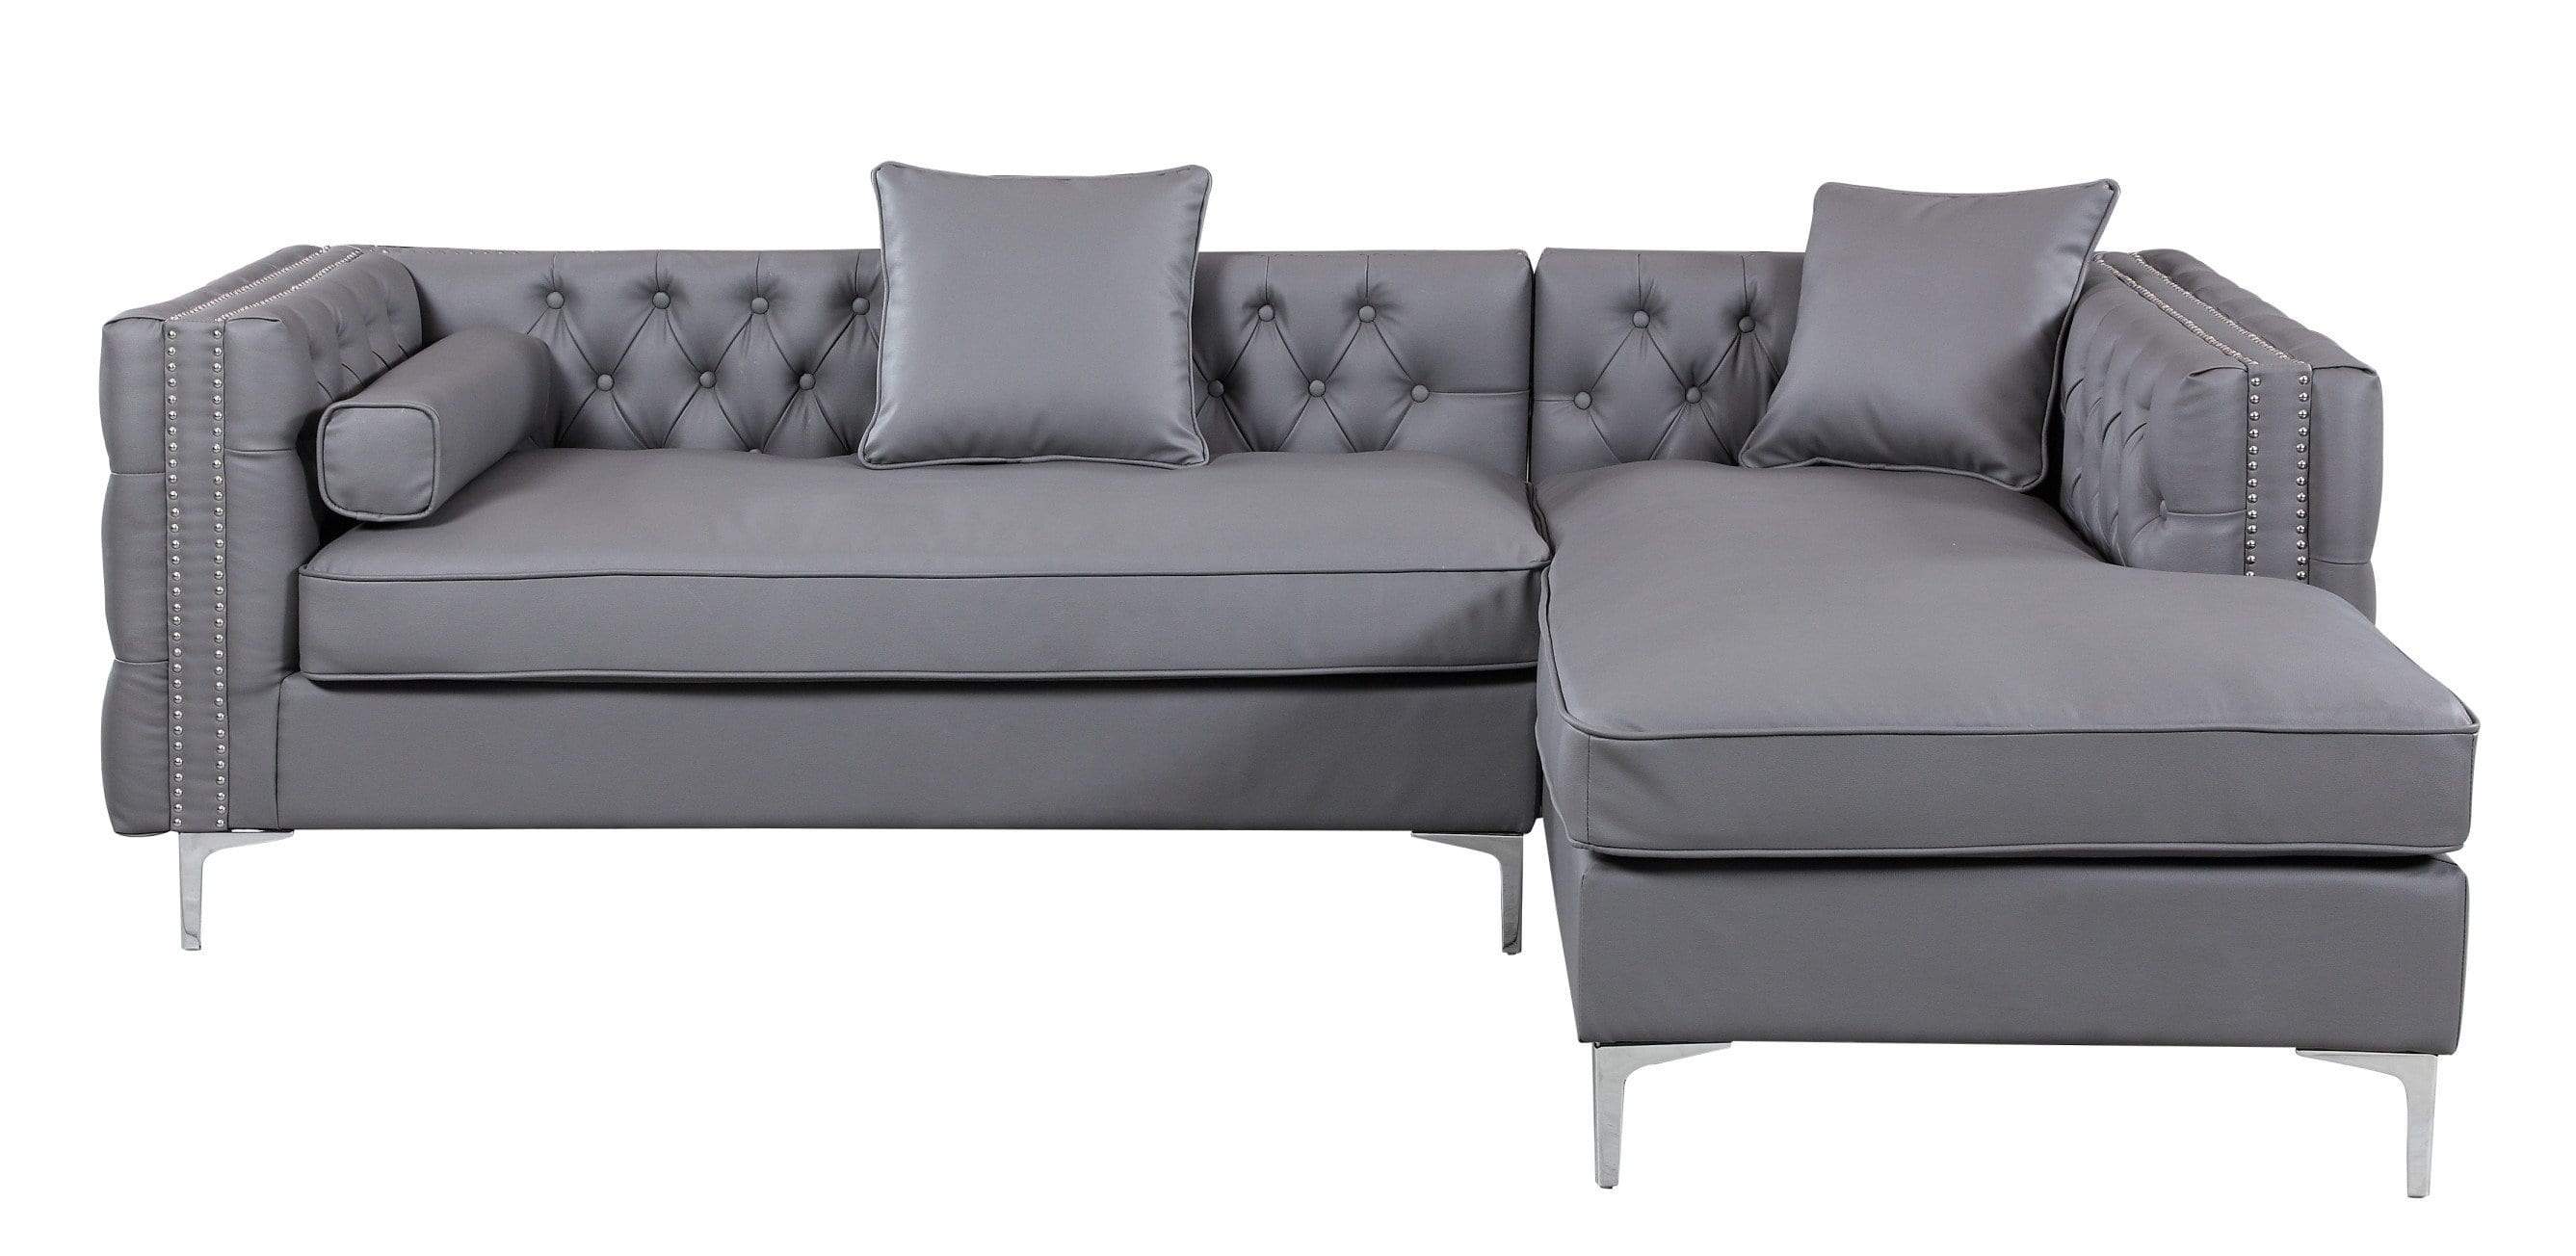 Monet Right Facing PU Leather Tufted Sectional Sofa